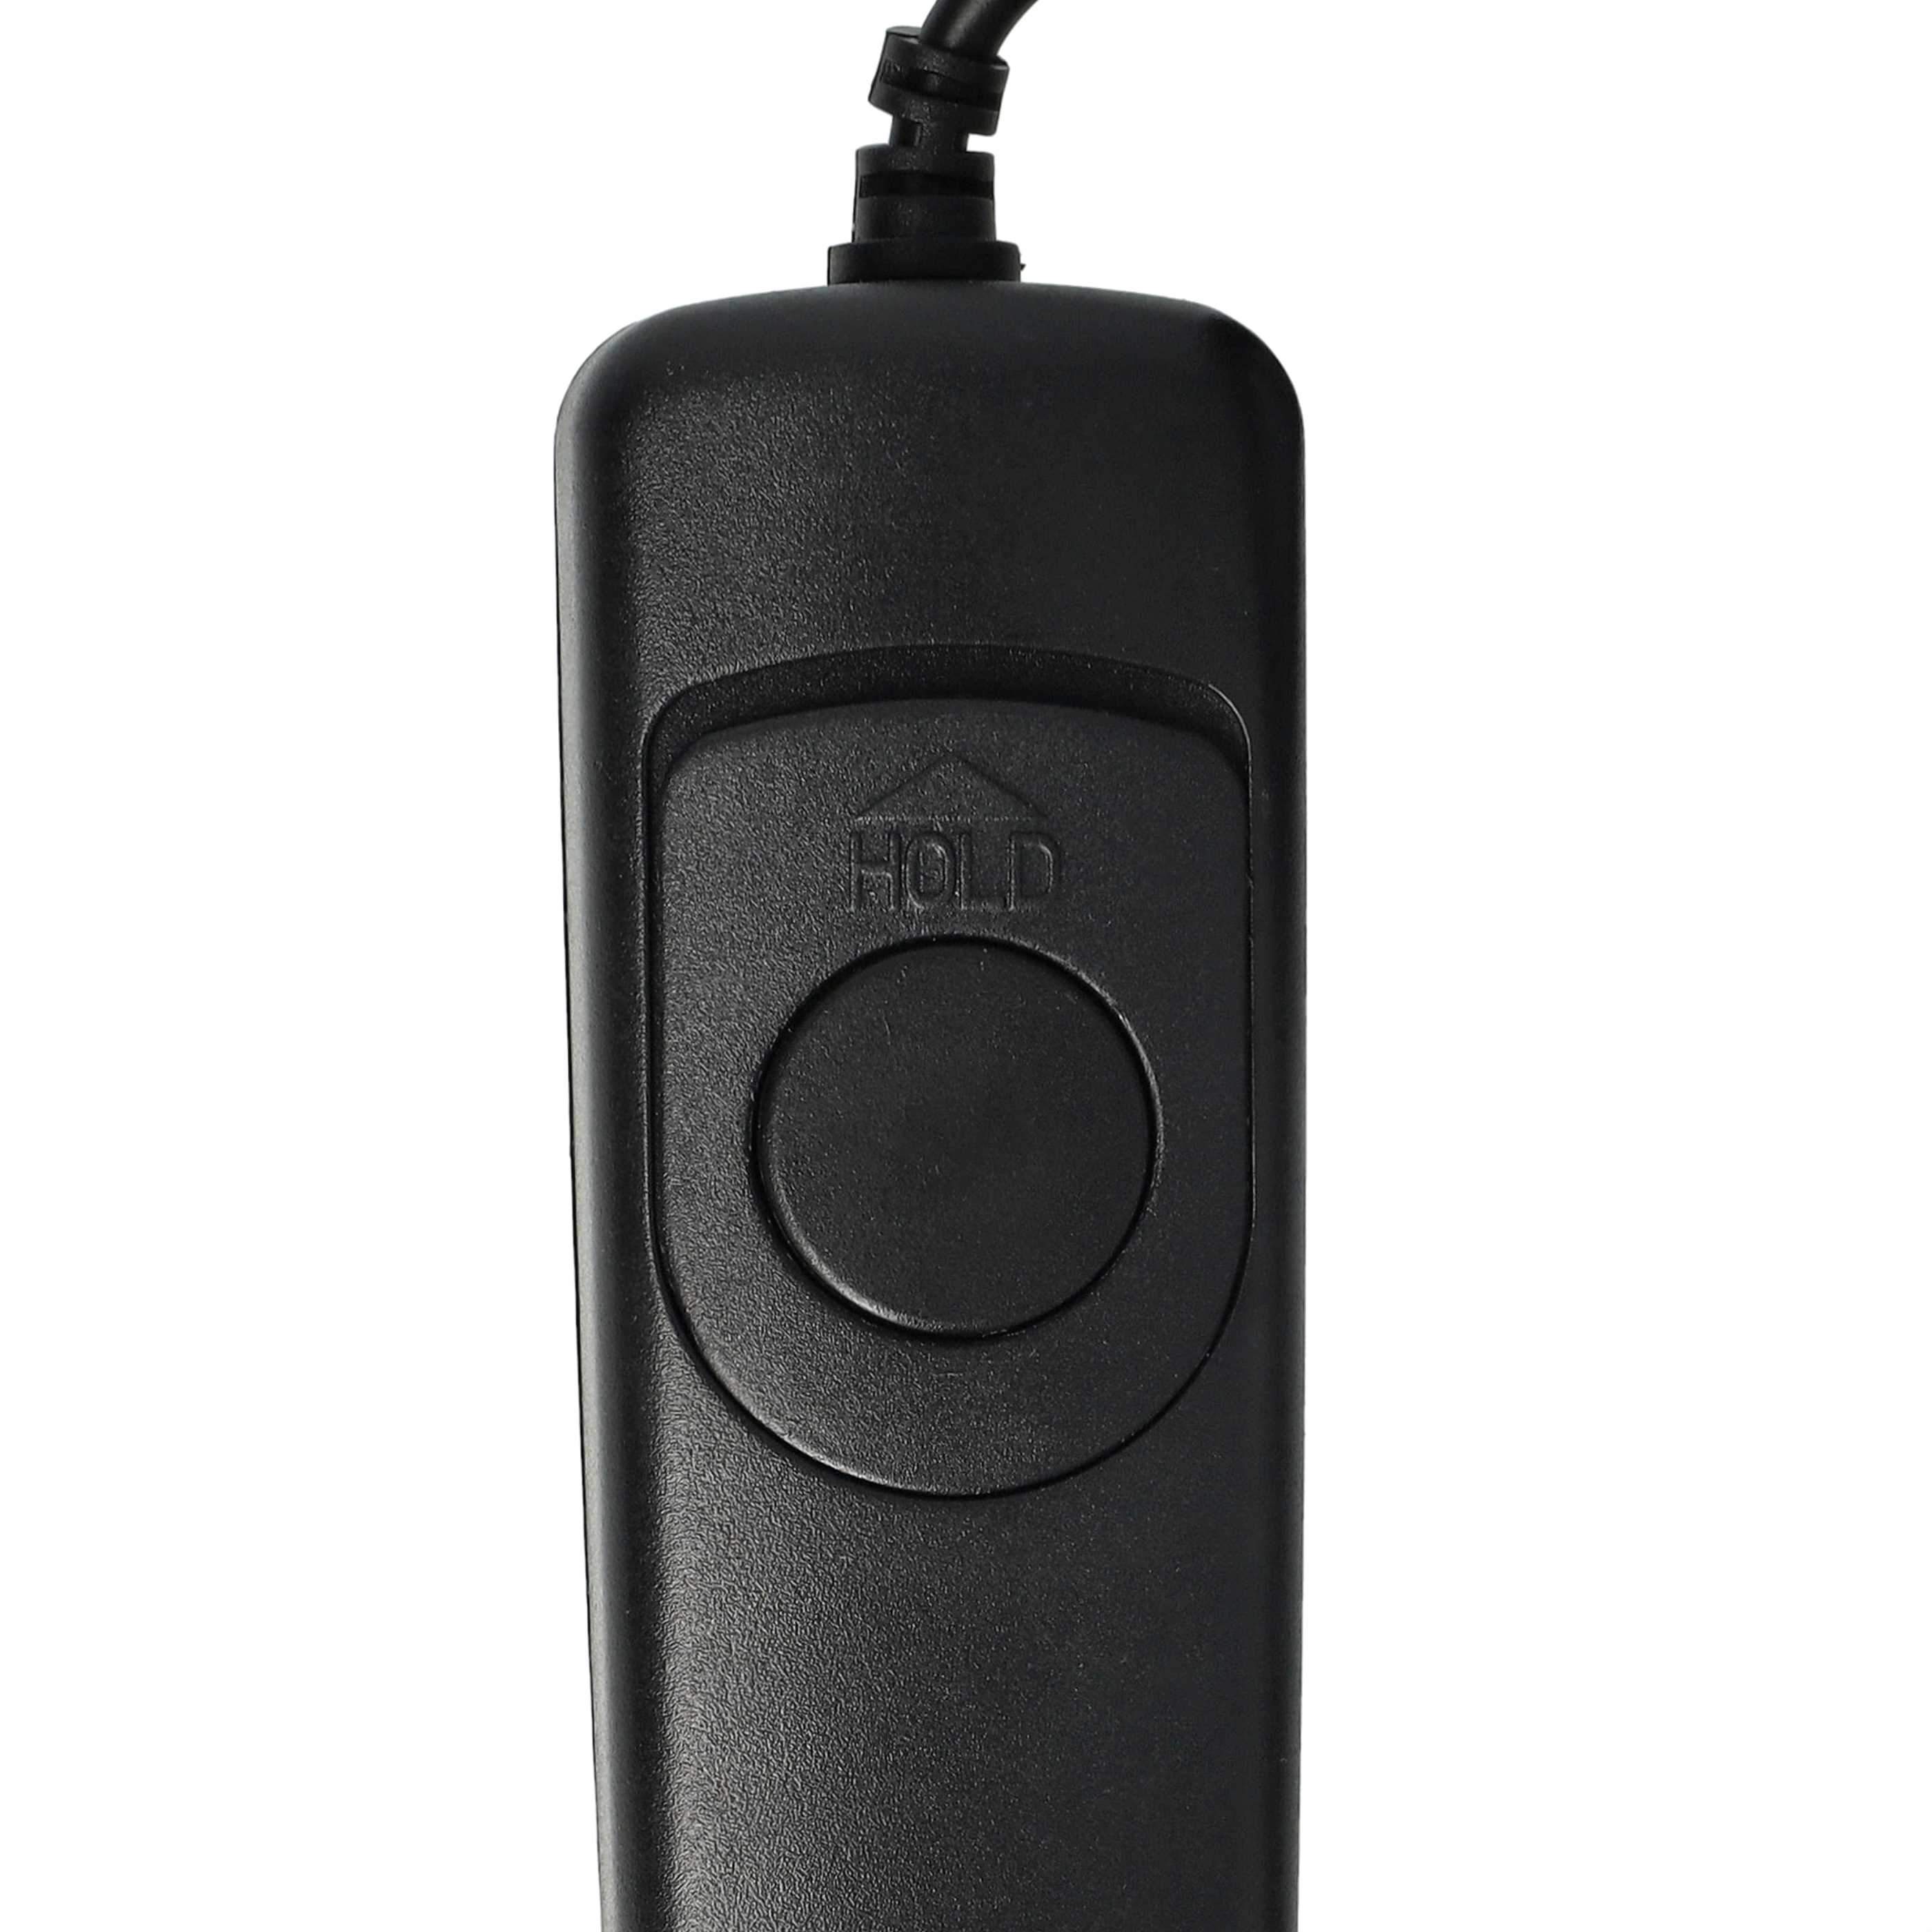 Remote Trigger as Exchange for Nikon MC-30 for Camera etc. 2-Step Shutter, 1 m Lead